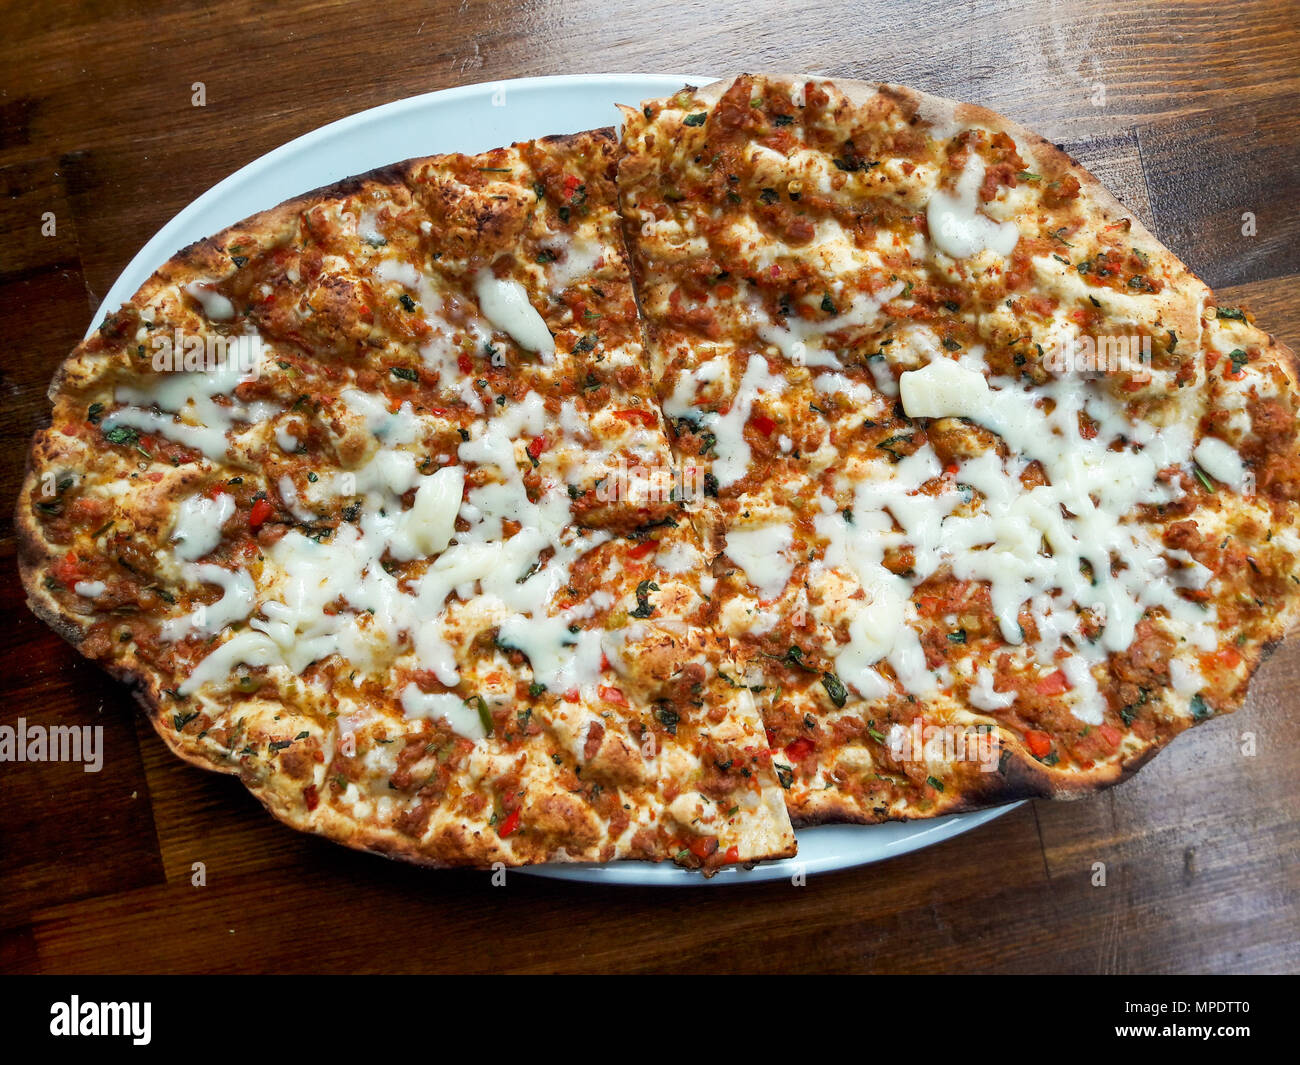 Turkish Pizza Lahmacun with Melted Cheese / Kasar Peyniri. Traditional Food. Stock Photo